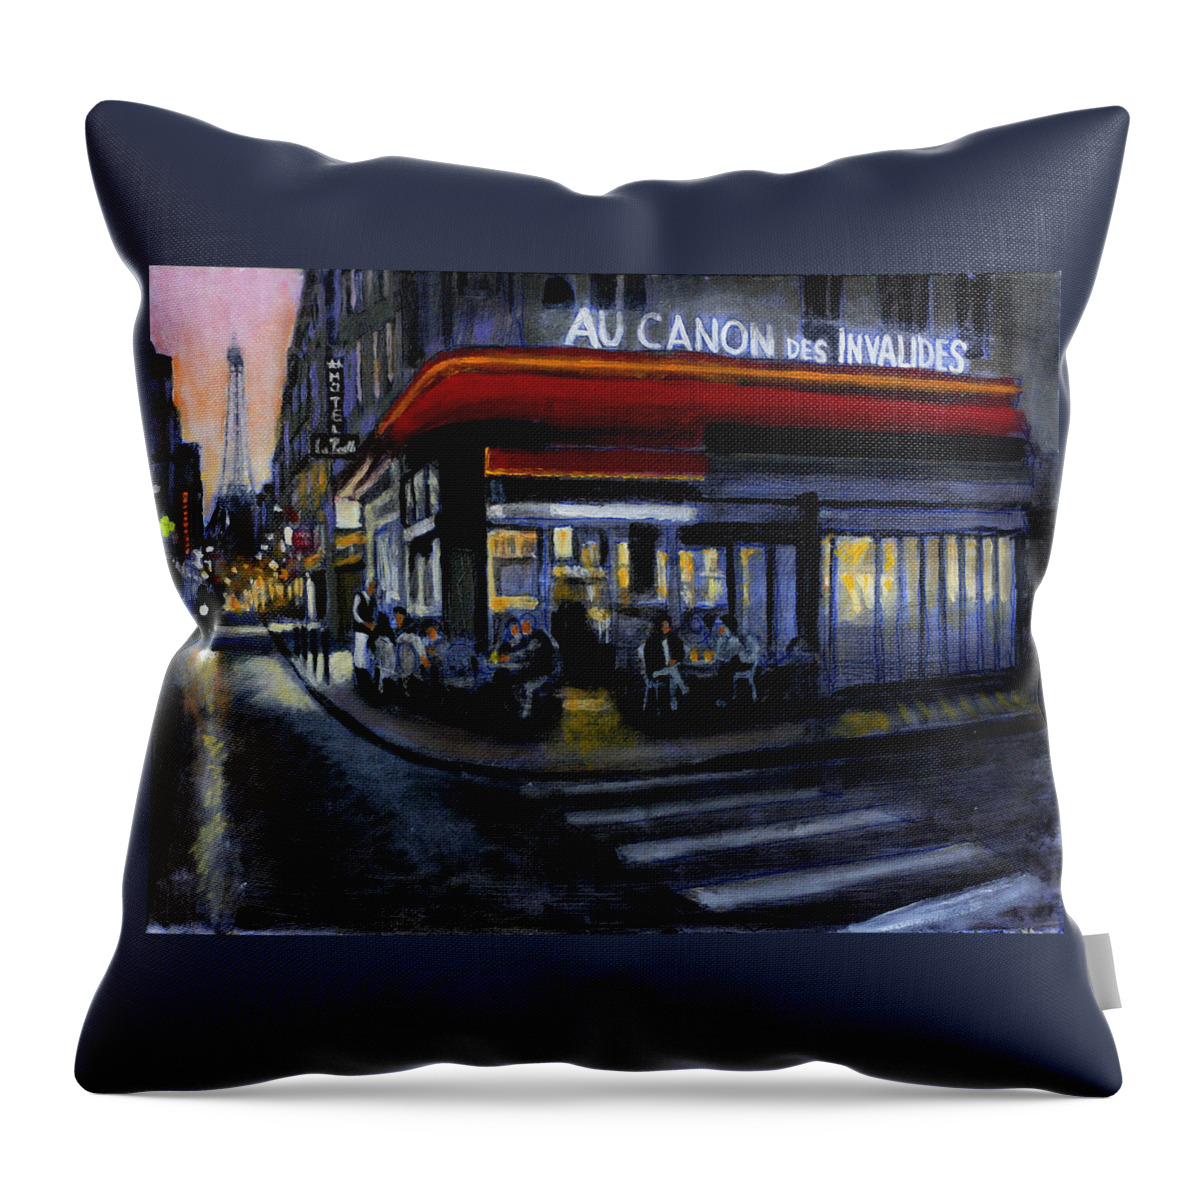 Paris Throw Pillow featuring the painting Au Canon Des Invalides by David Zimmerman